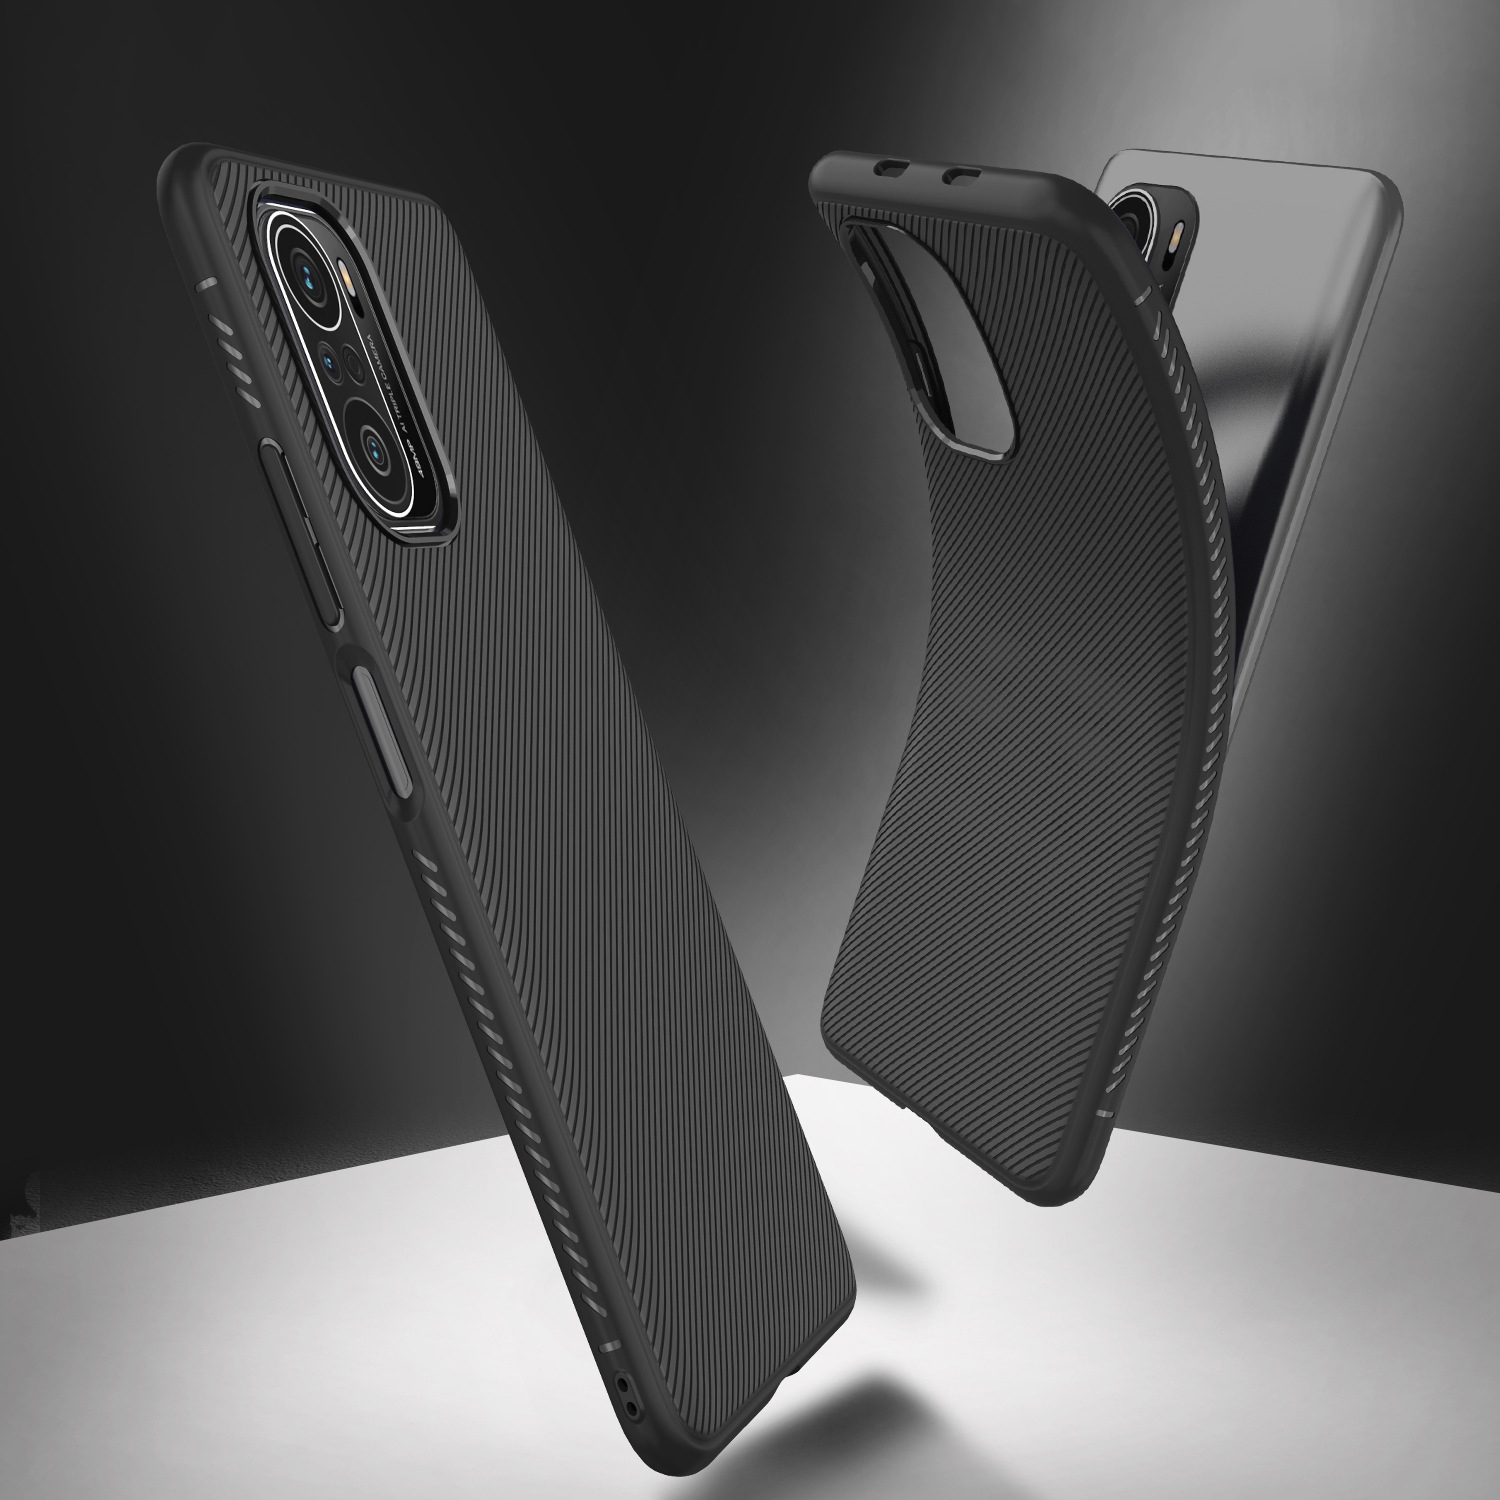 Bakeey-for-POCO-F3-Global-Version-Case-Carbon-Fiber-Texture-Slim-Soft-Silicone-Shockproof-Protective-1844941-2